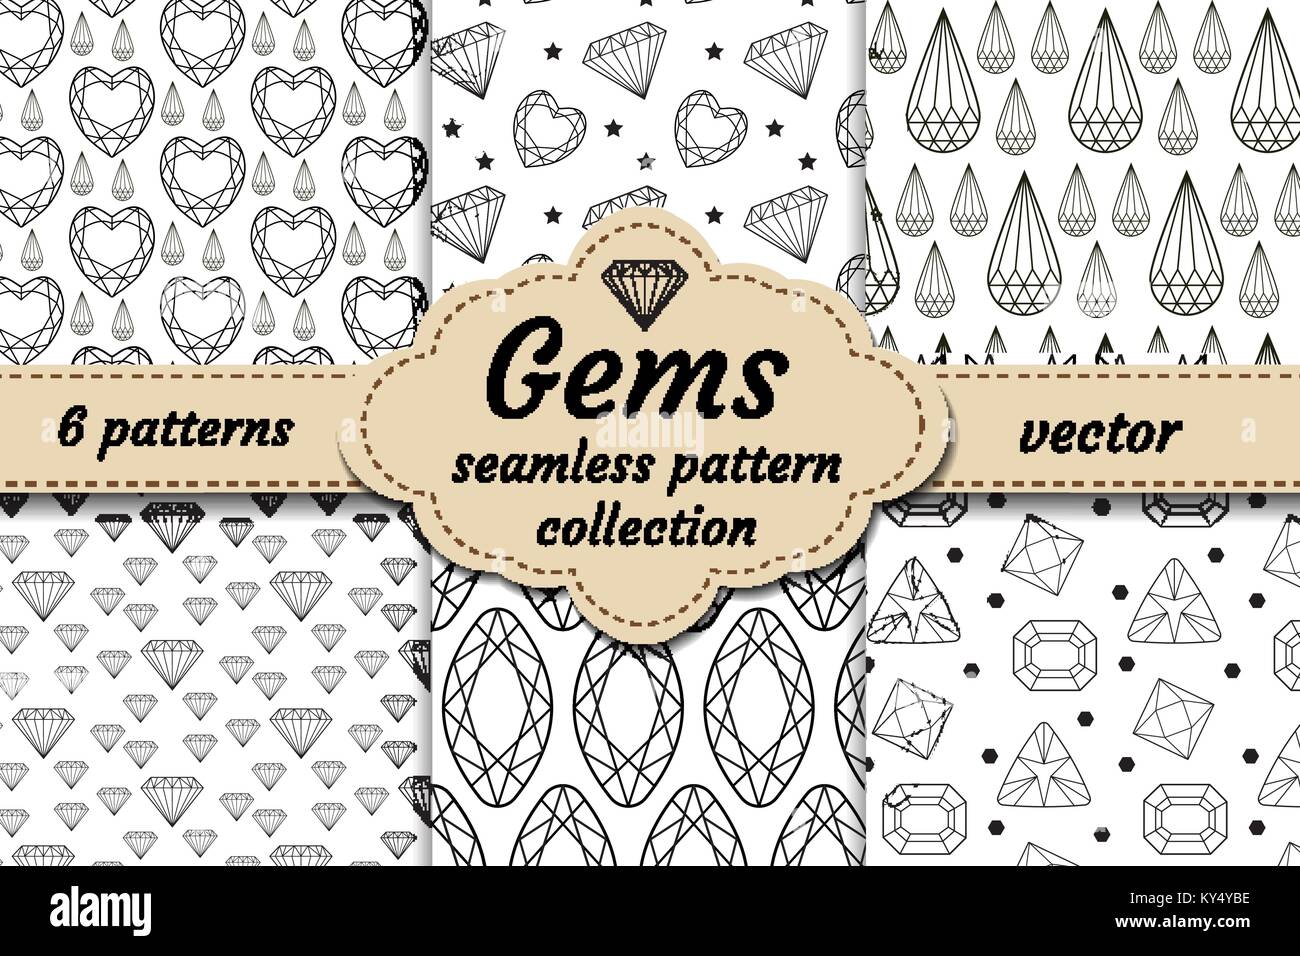 Seamless Pattern With Black Gems Stock Illustration - Download